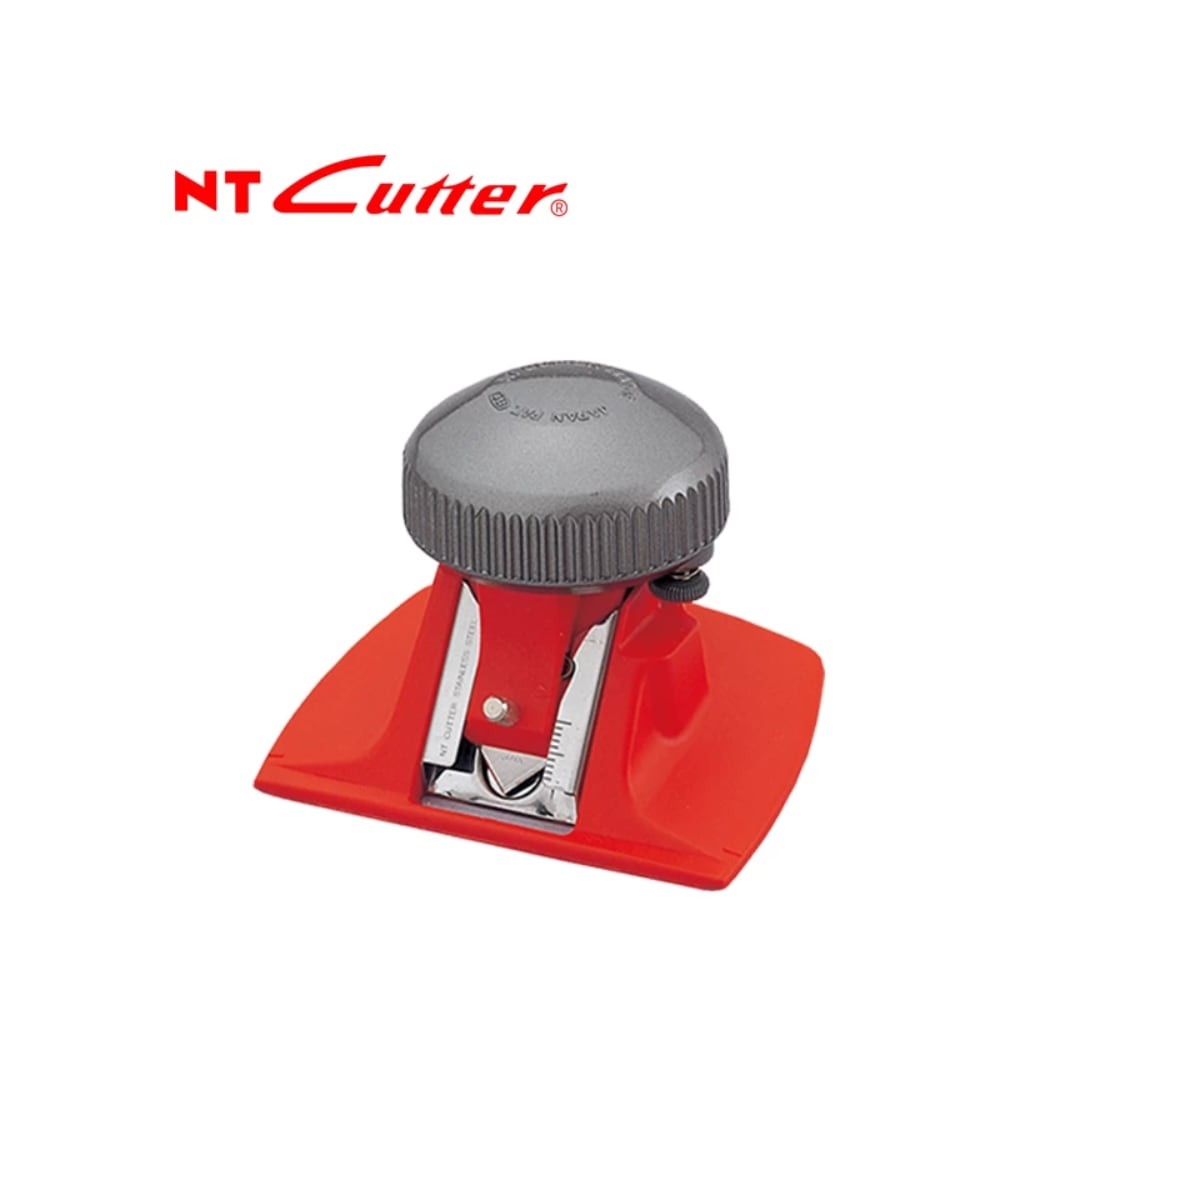 NT Cutter MAT-45P How to use 